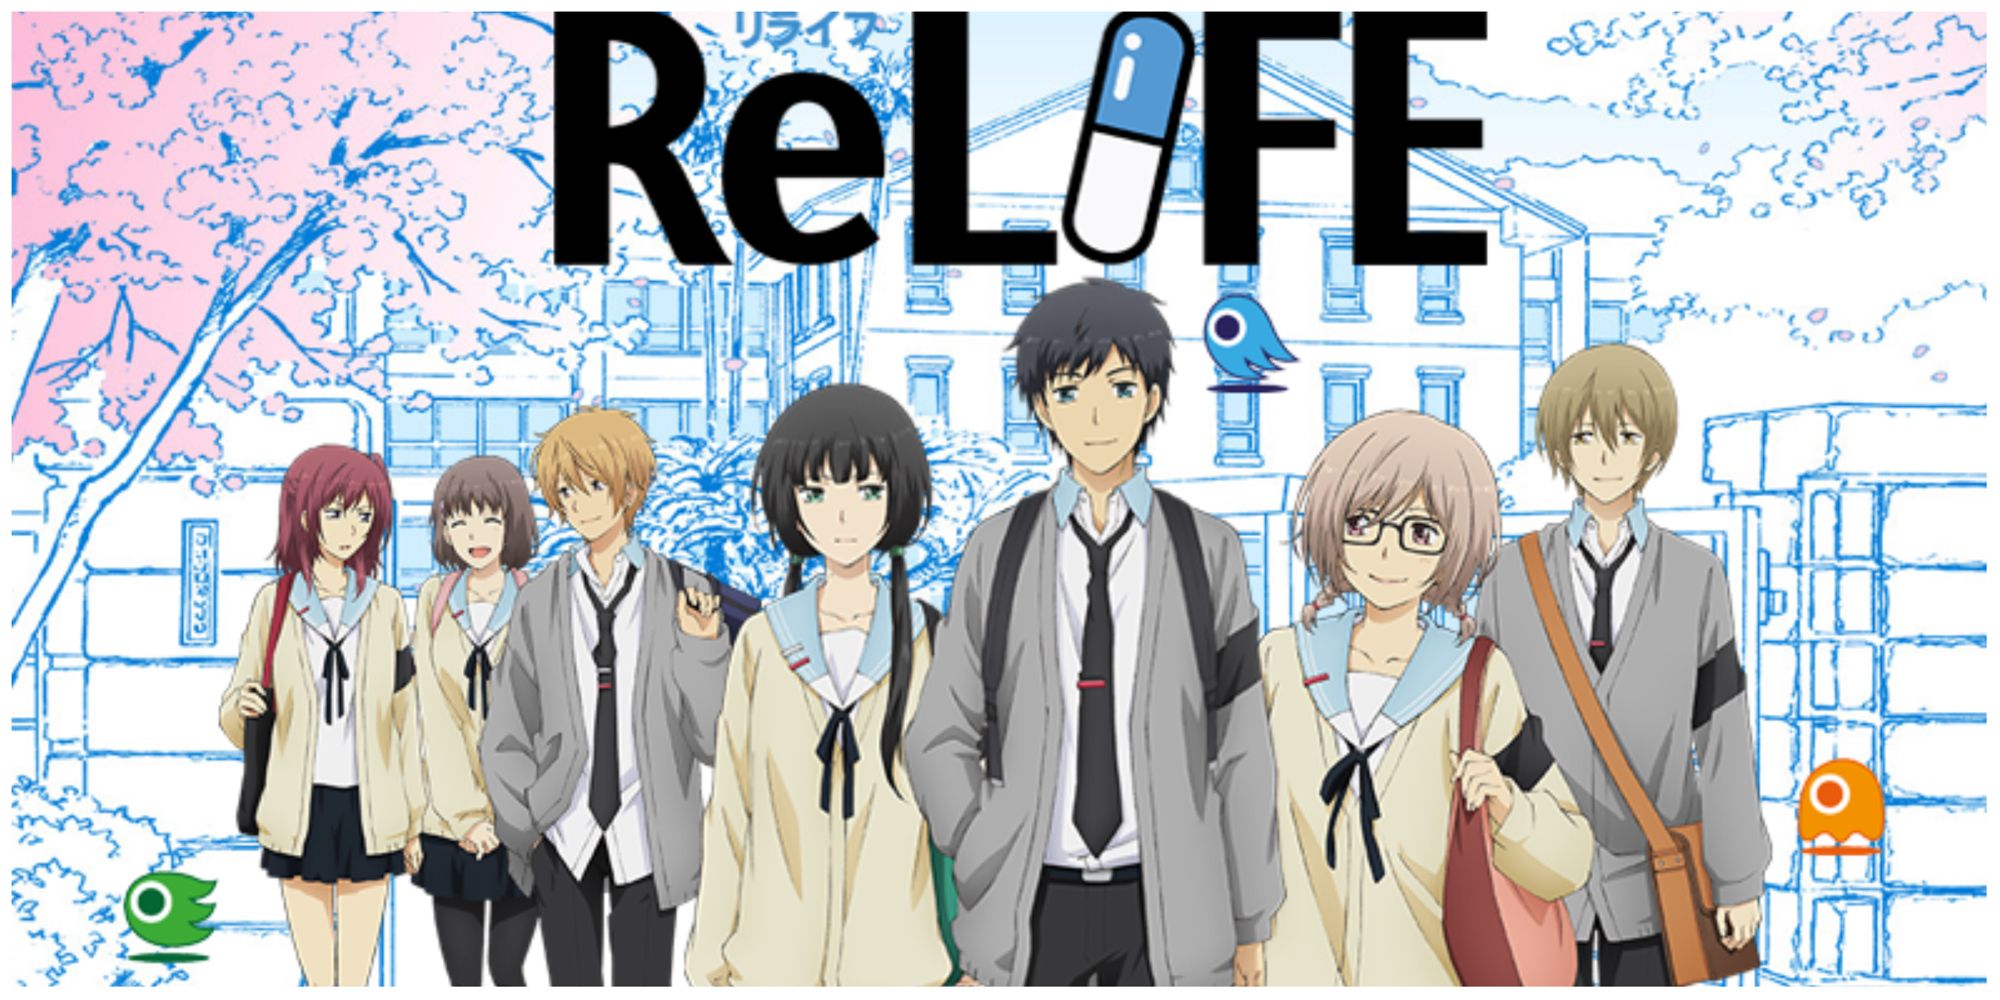 Characters from ReLife.